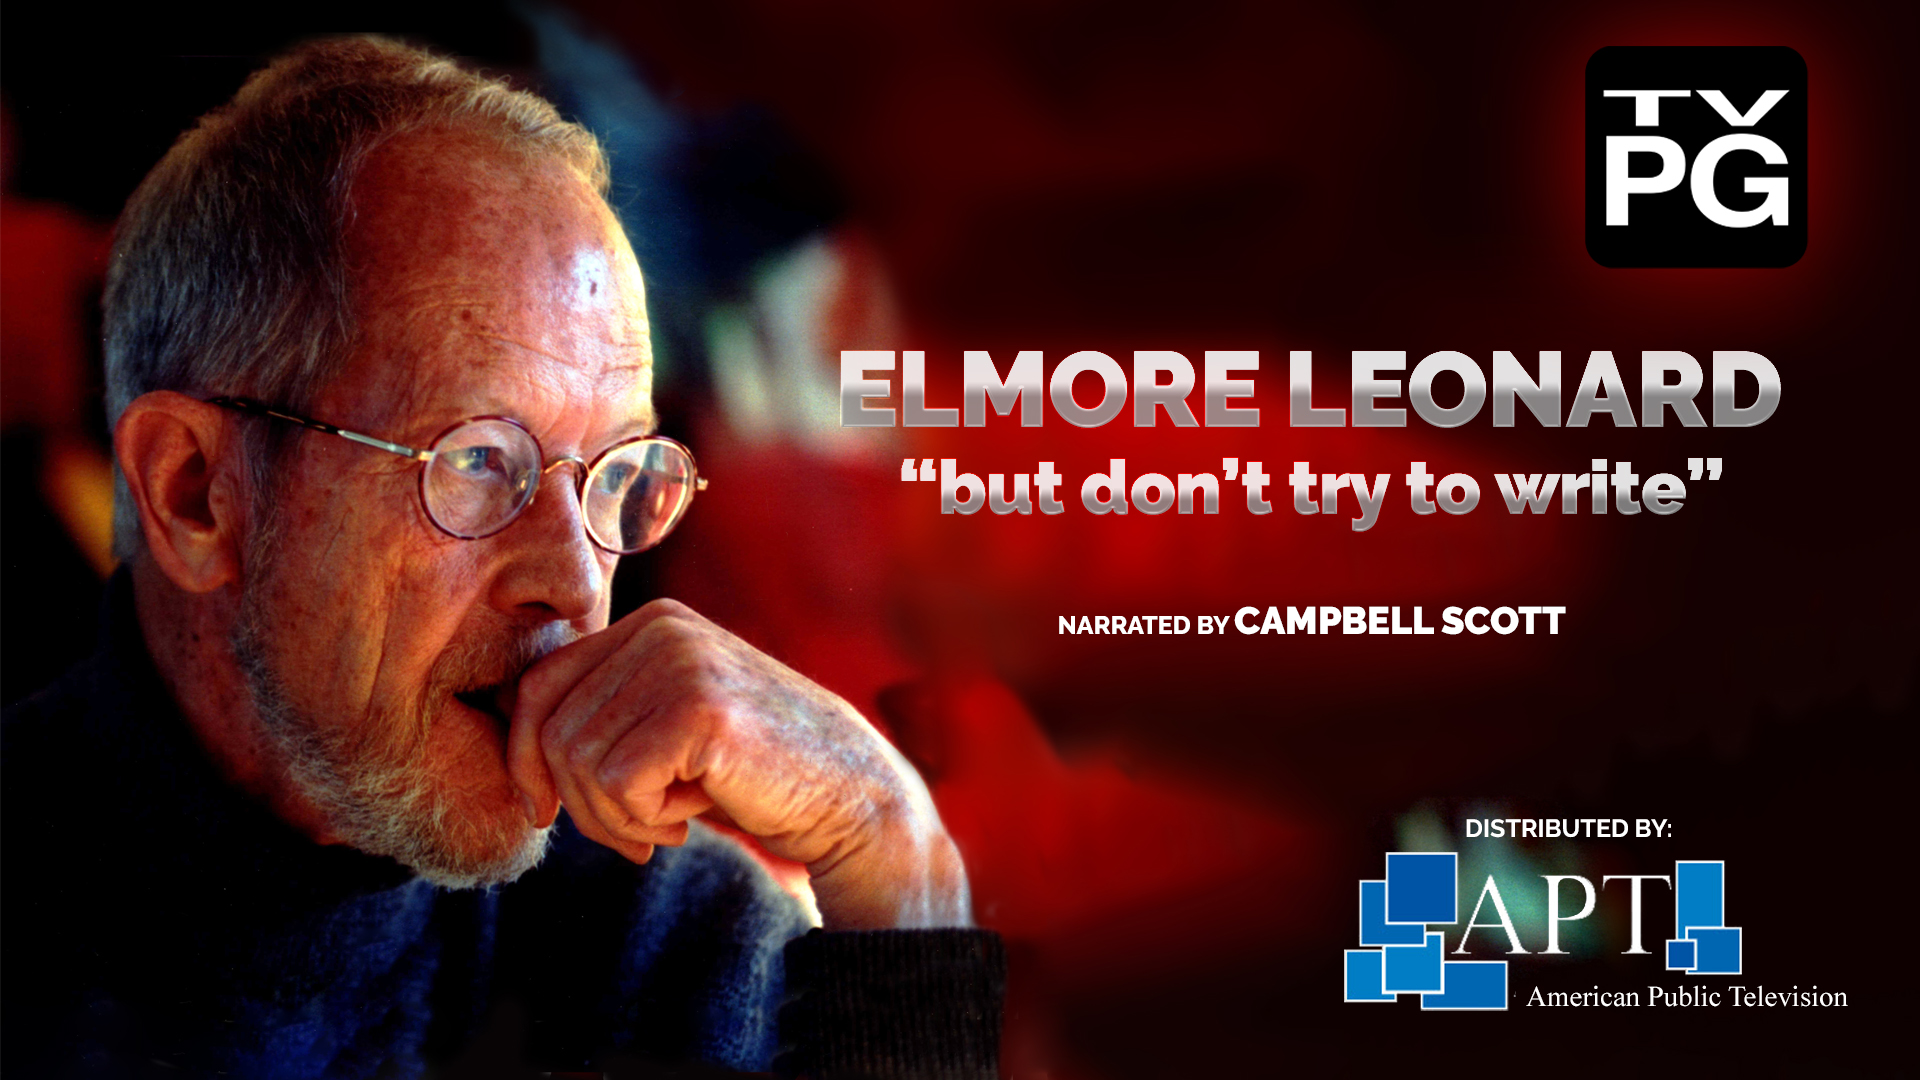 “Elmore Leonard: But Don’t Try To Write” Documentary (Directed by John Mulholland) To Be Featured At Freeps Film Festival In Detroit 4/29/23